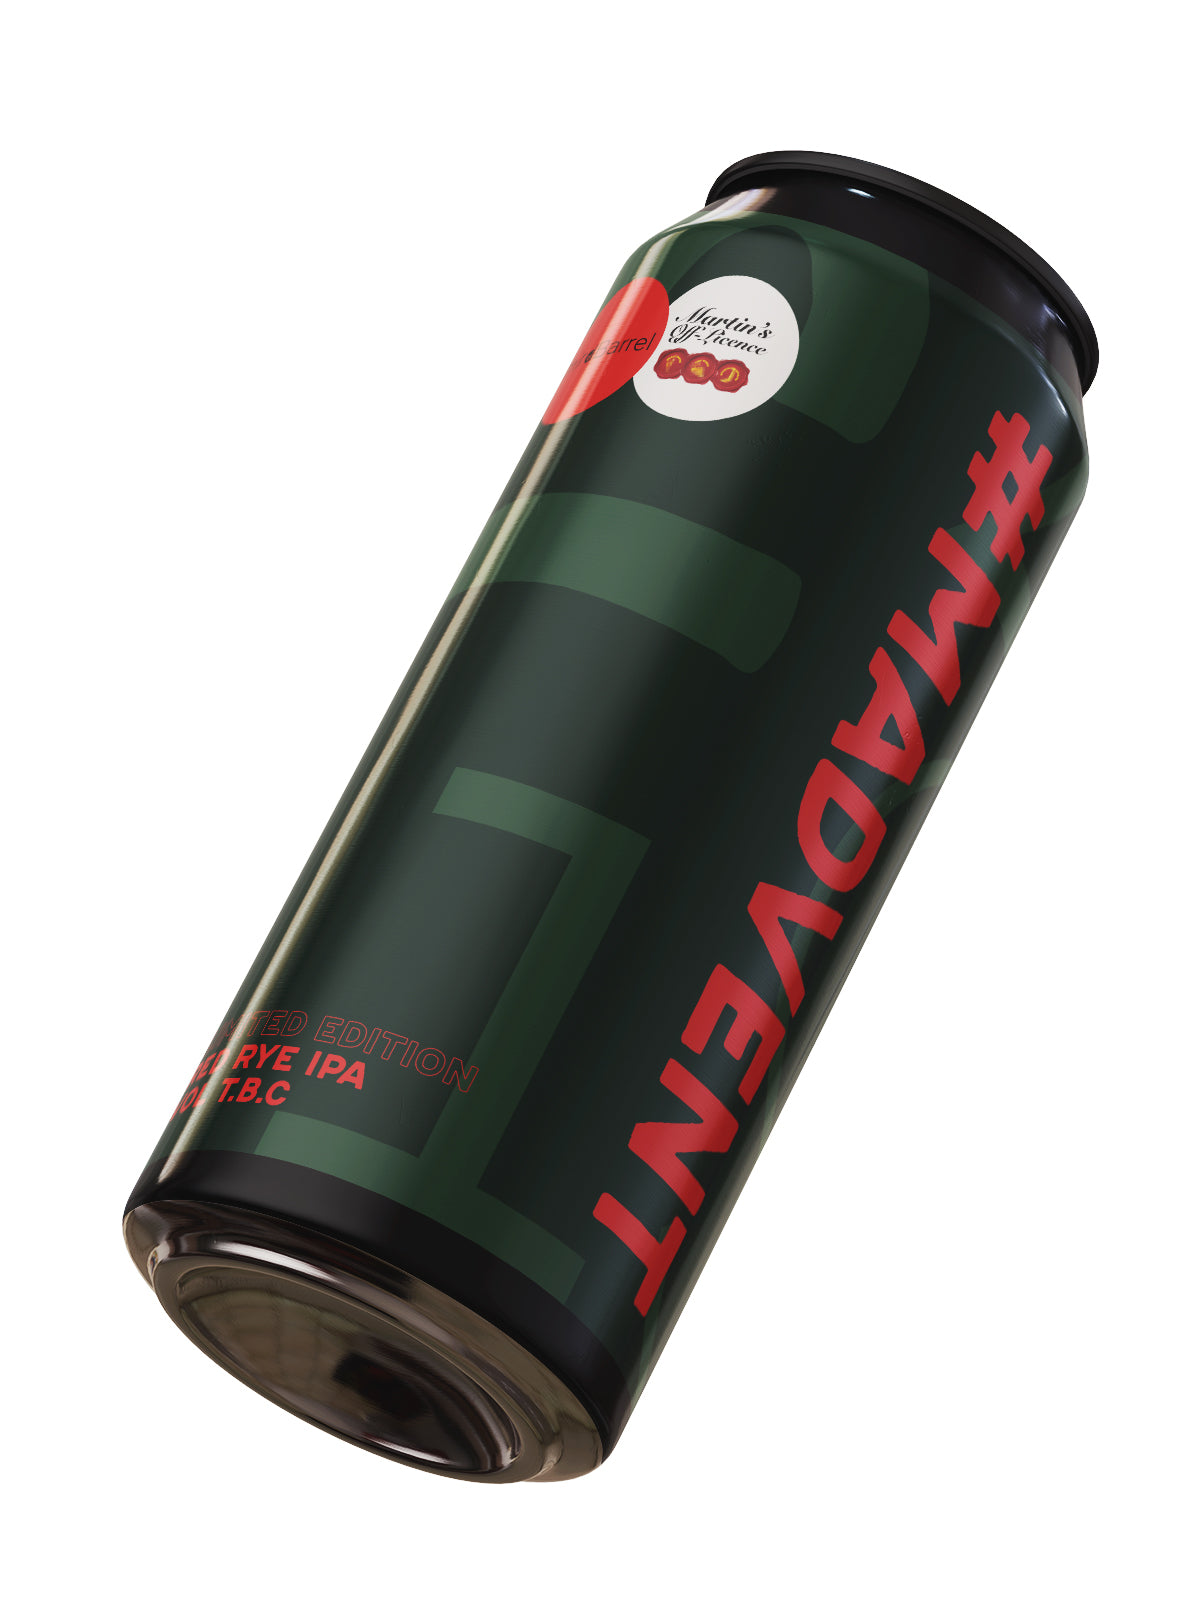 Third Barrel & Martin's - #Madvent Limited Edition Red Rye IPA 6.5% ABV 440ml Can